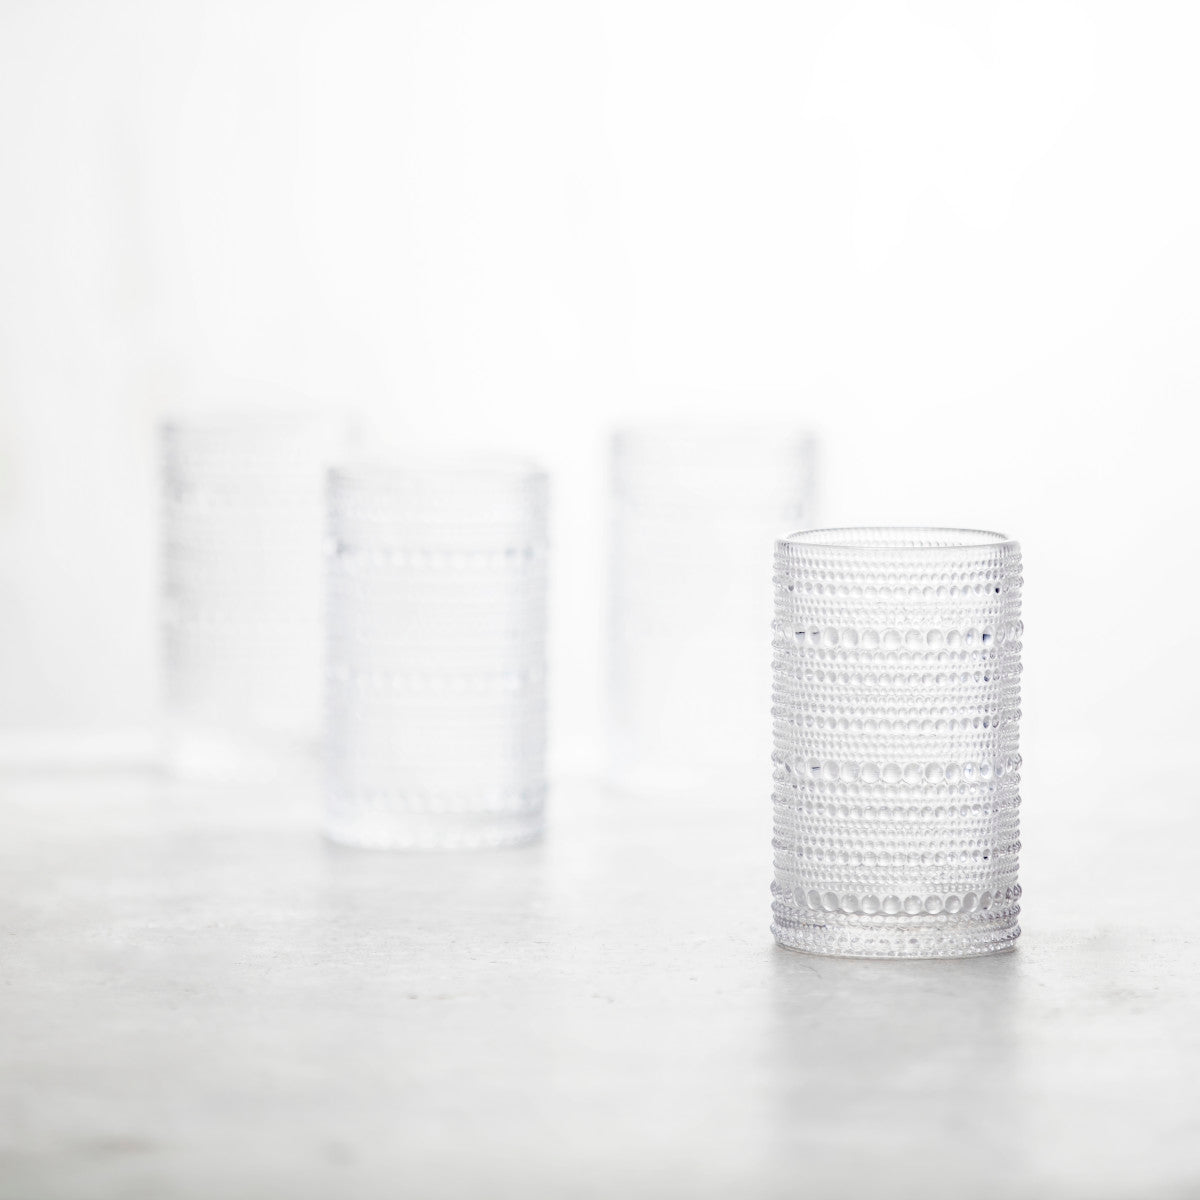 4 clear jupiter iced beverage glasses arranged on a countertop.